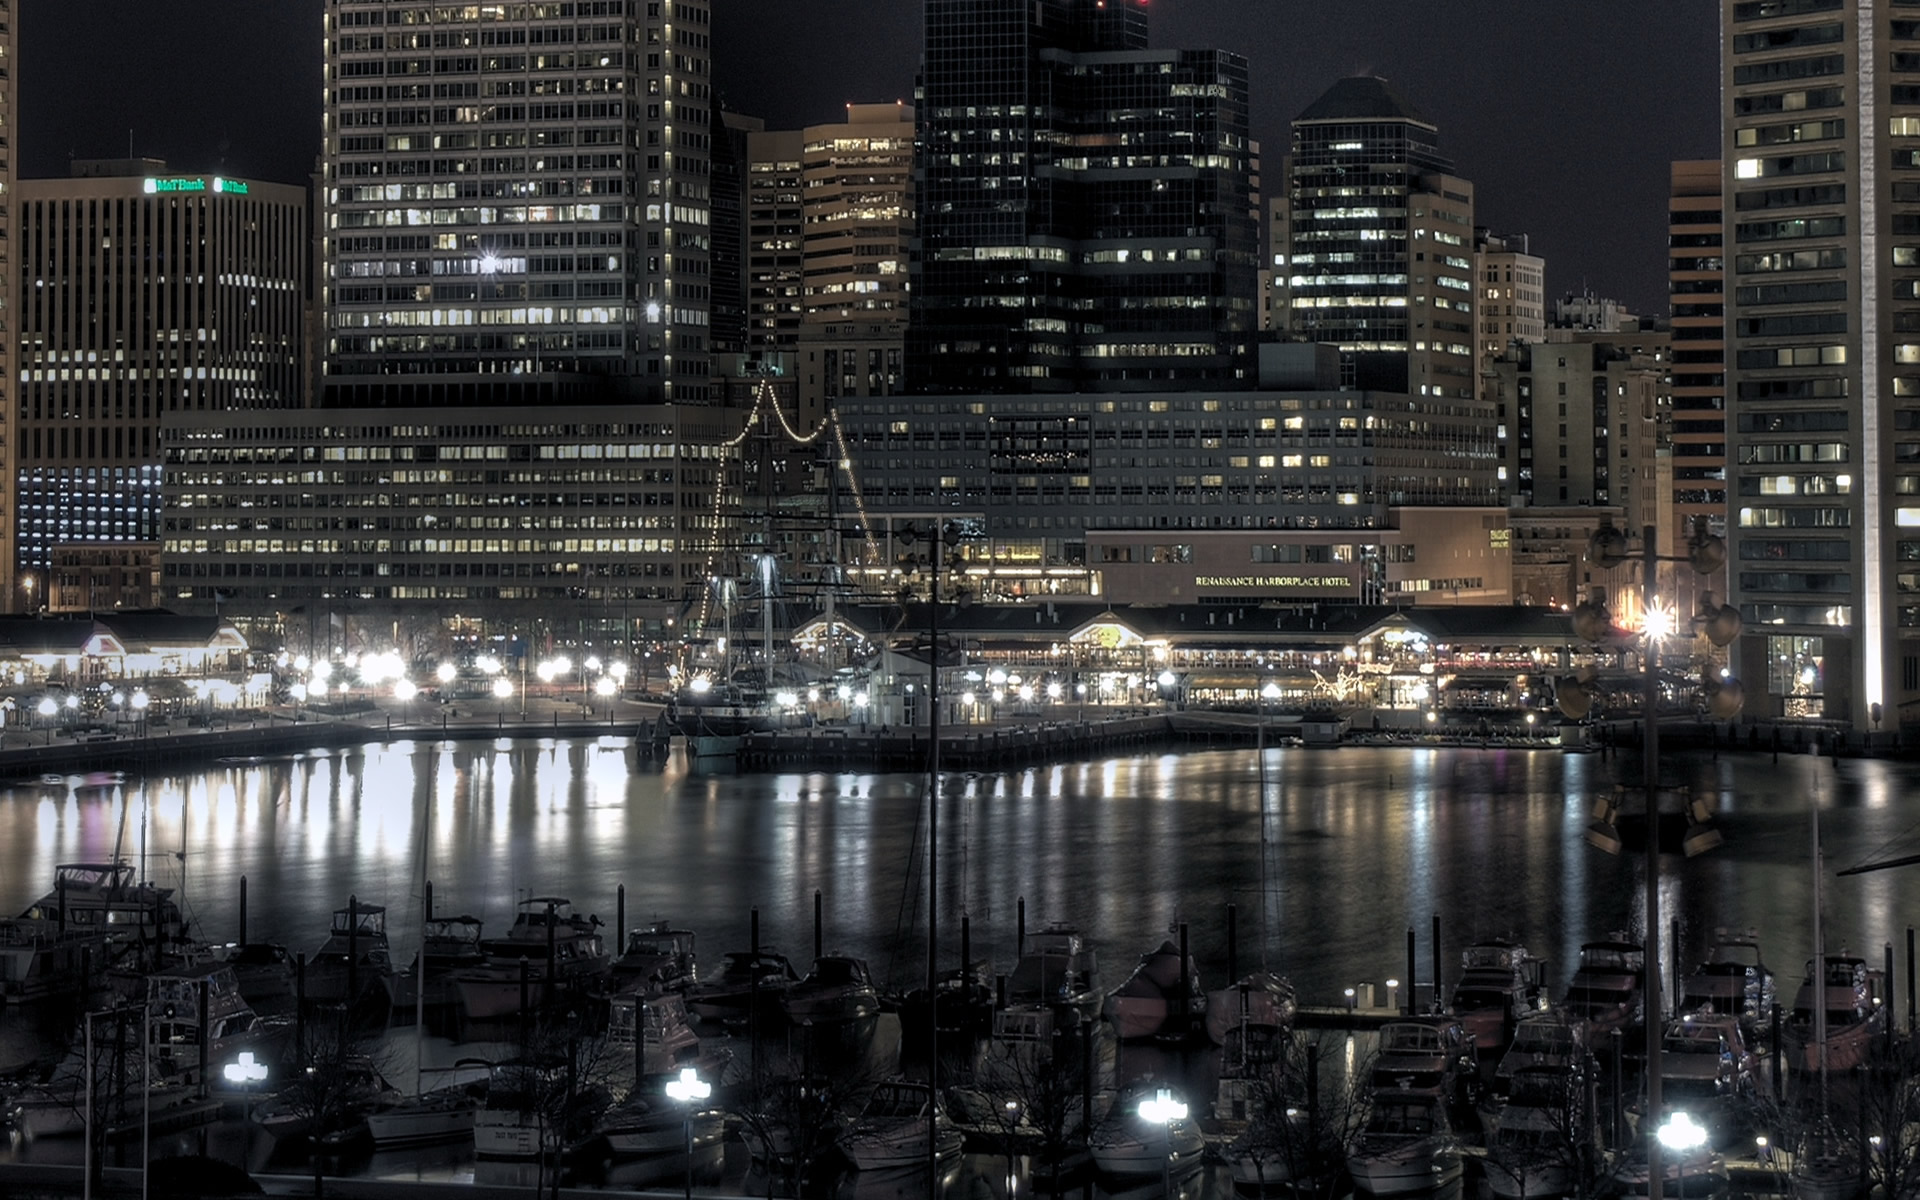 baltimore, man made, boat, city, light, river, cities Full HD